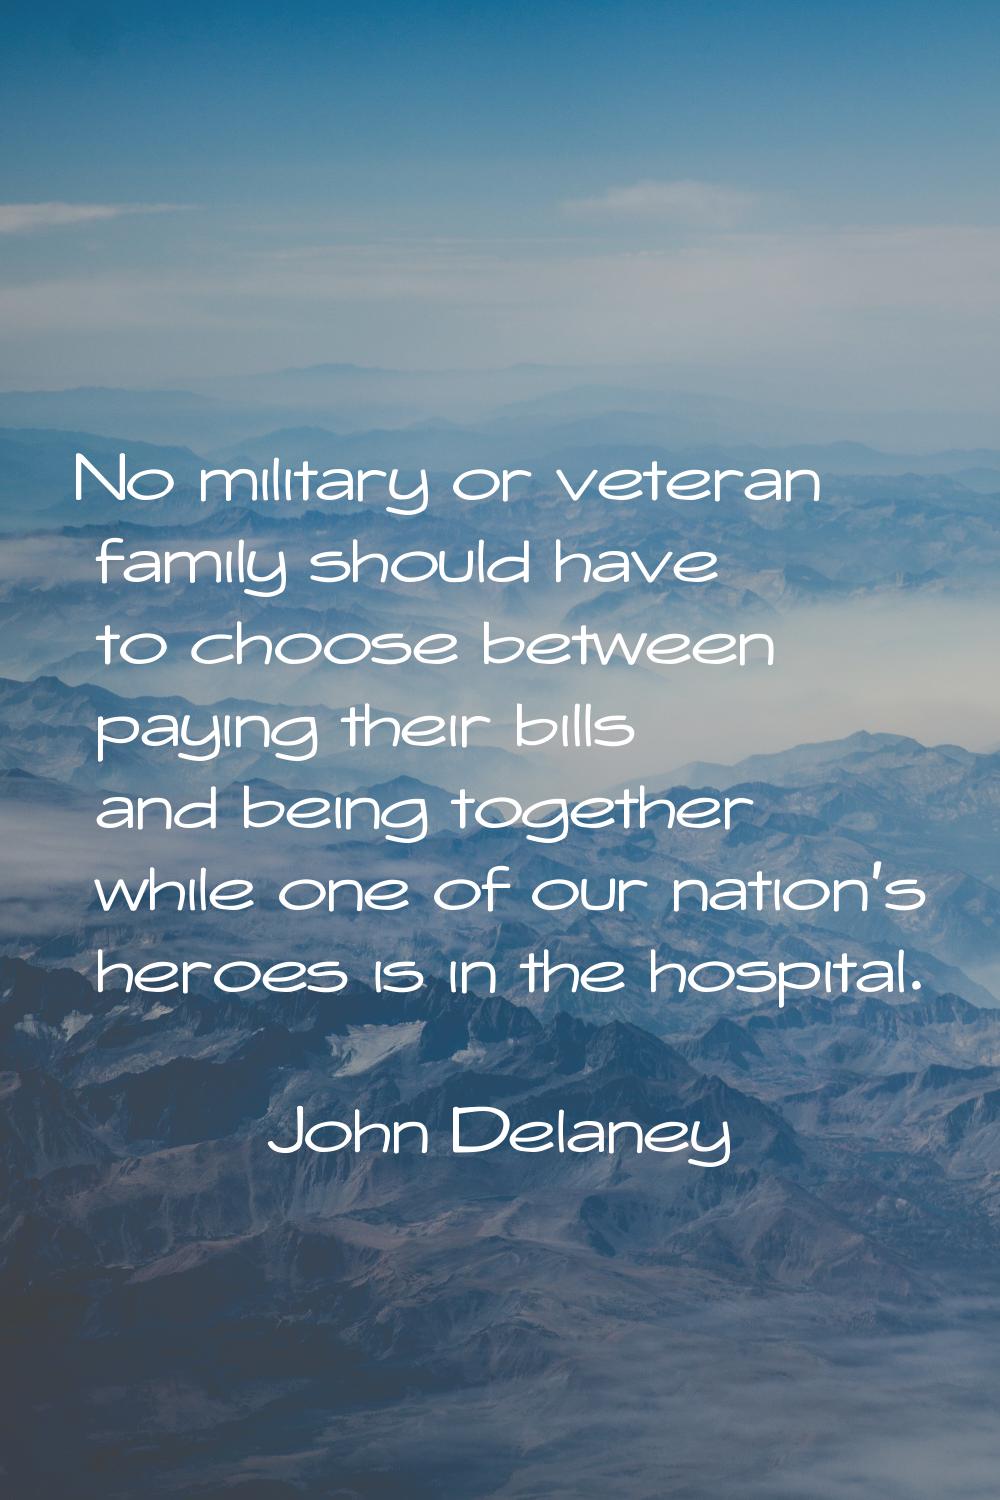 No military or veteran family should have to choose between paying their bills and being together w